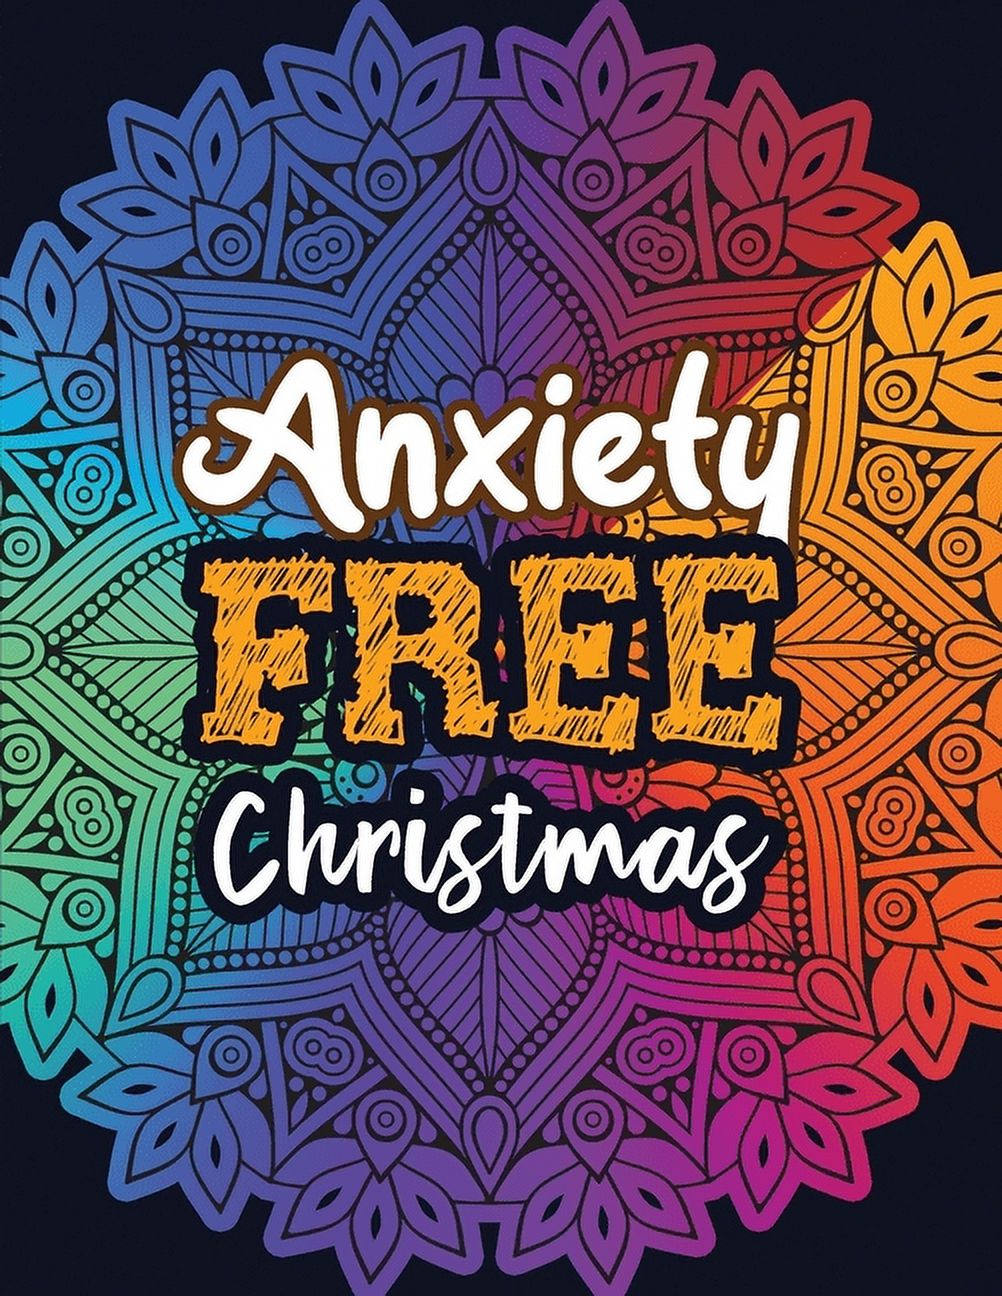 Anxiety Free Christmas: Christmas Anti Anxiety Coloring Book, Relaxation and Stress Reduction Color Therapy for Adults, Girls and Teens. [Book]